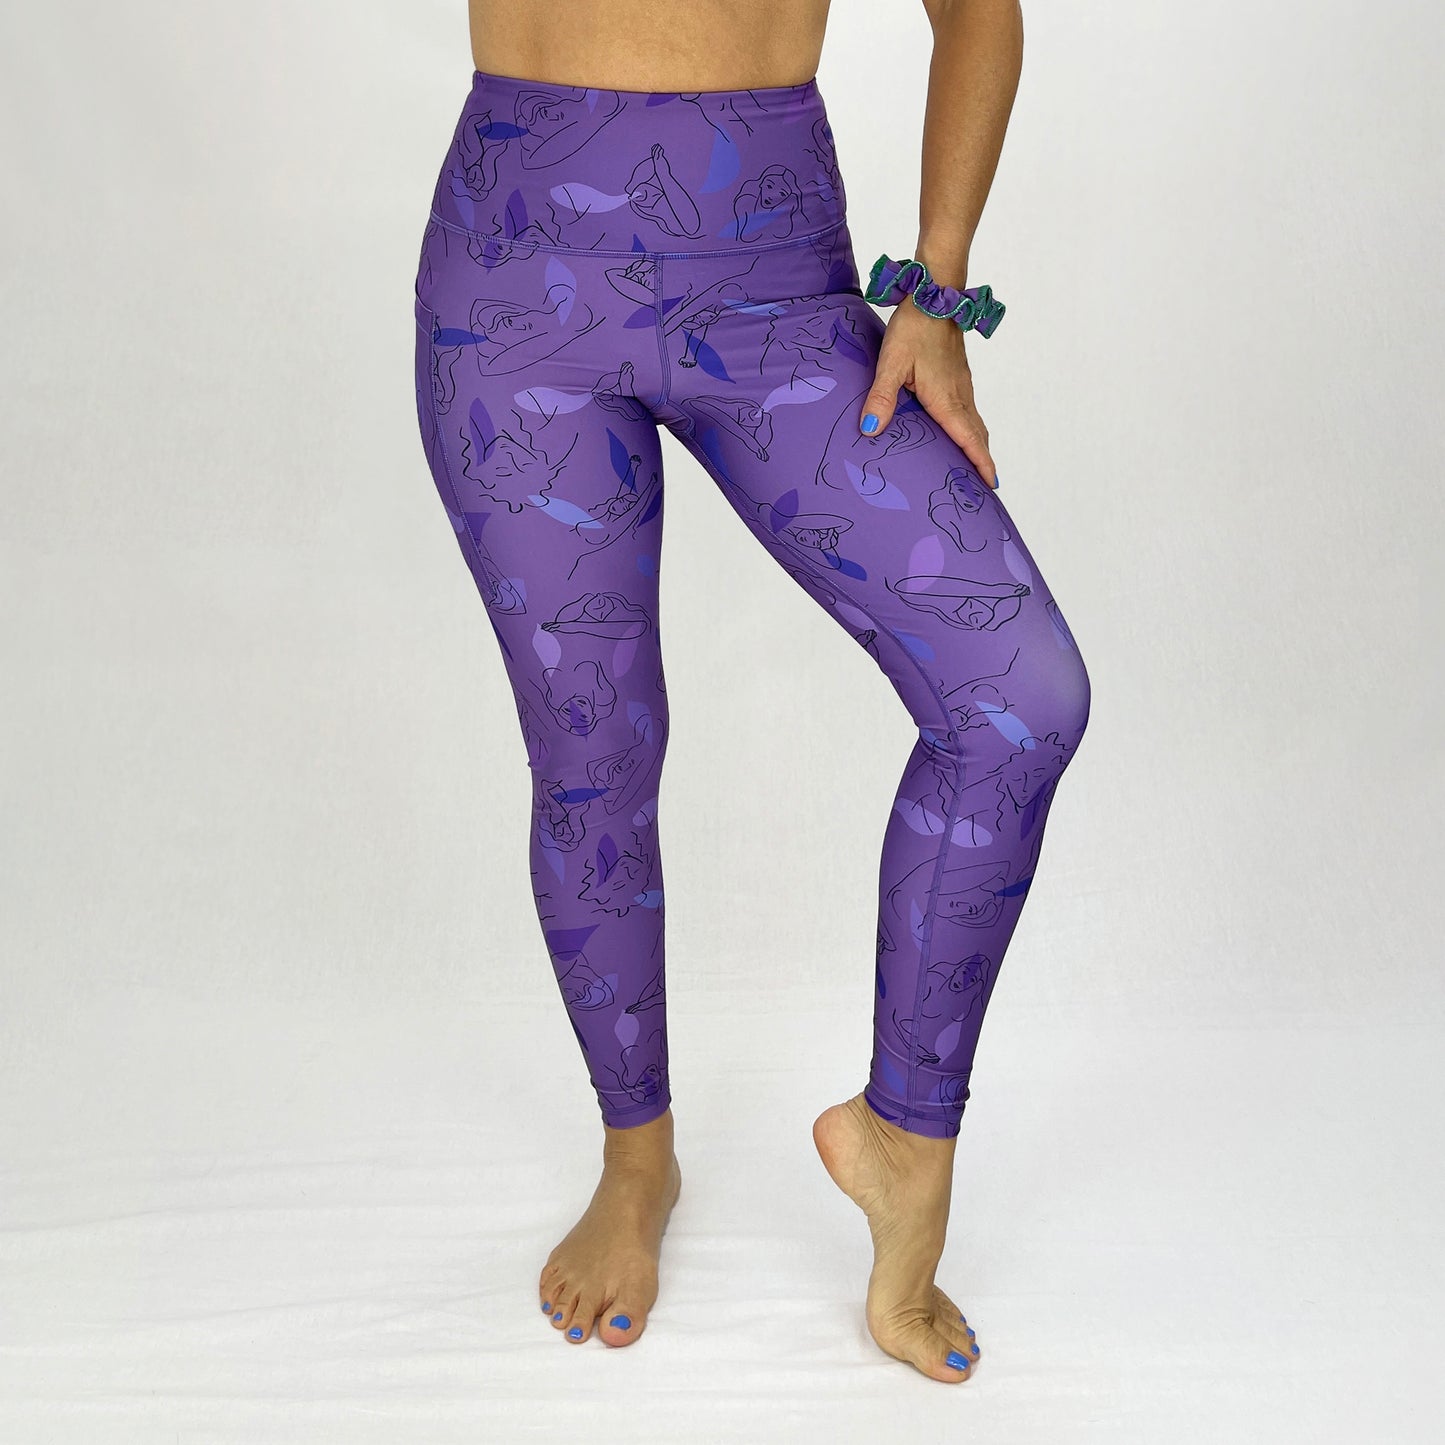 colourful high rise leggings with pockets made sustainably from recycled materials - purple women - front